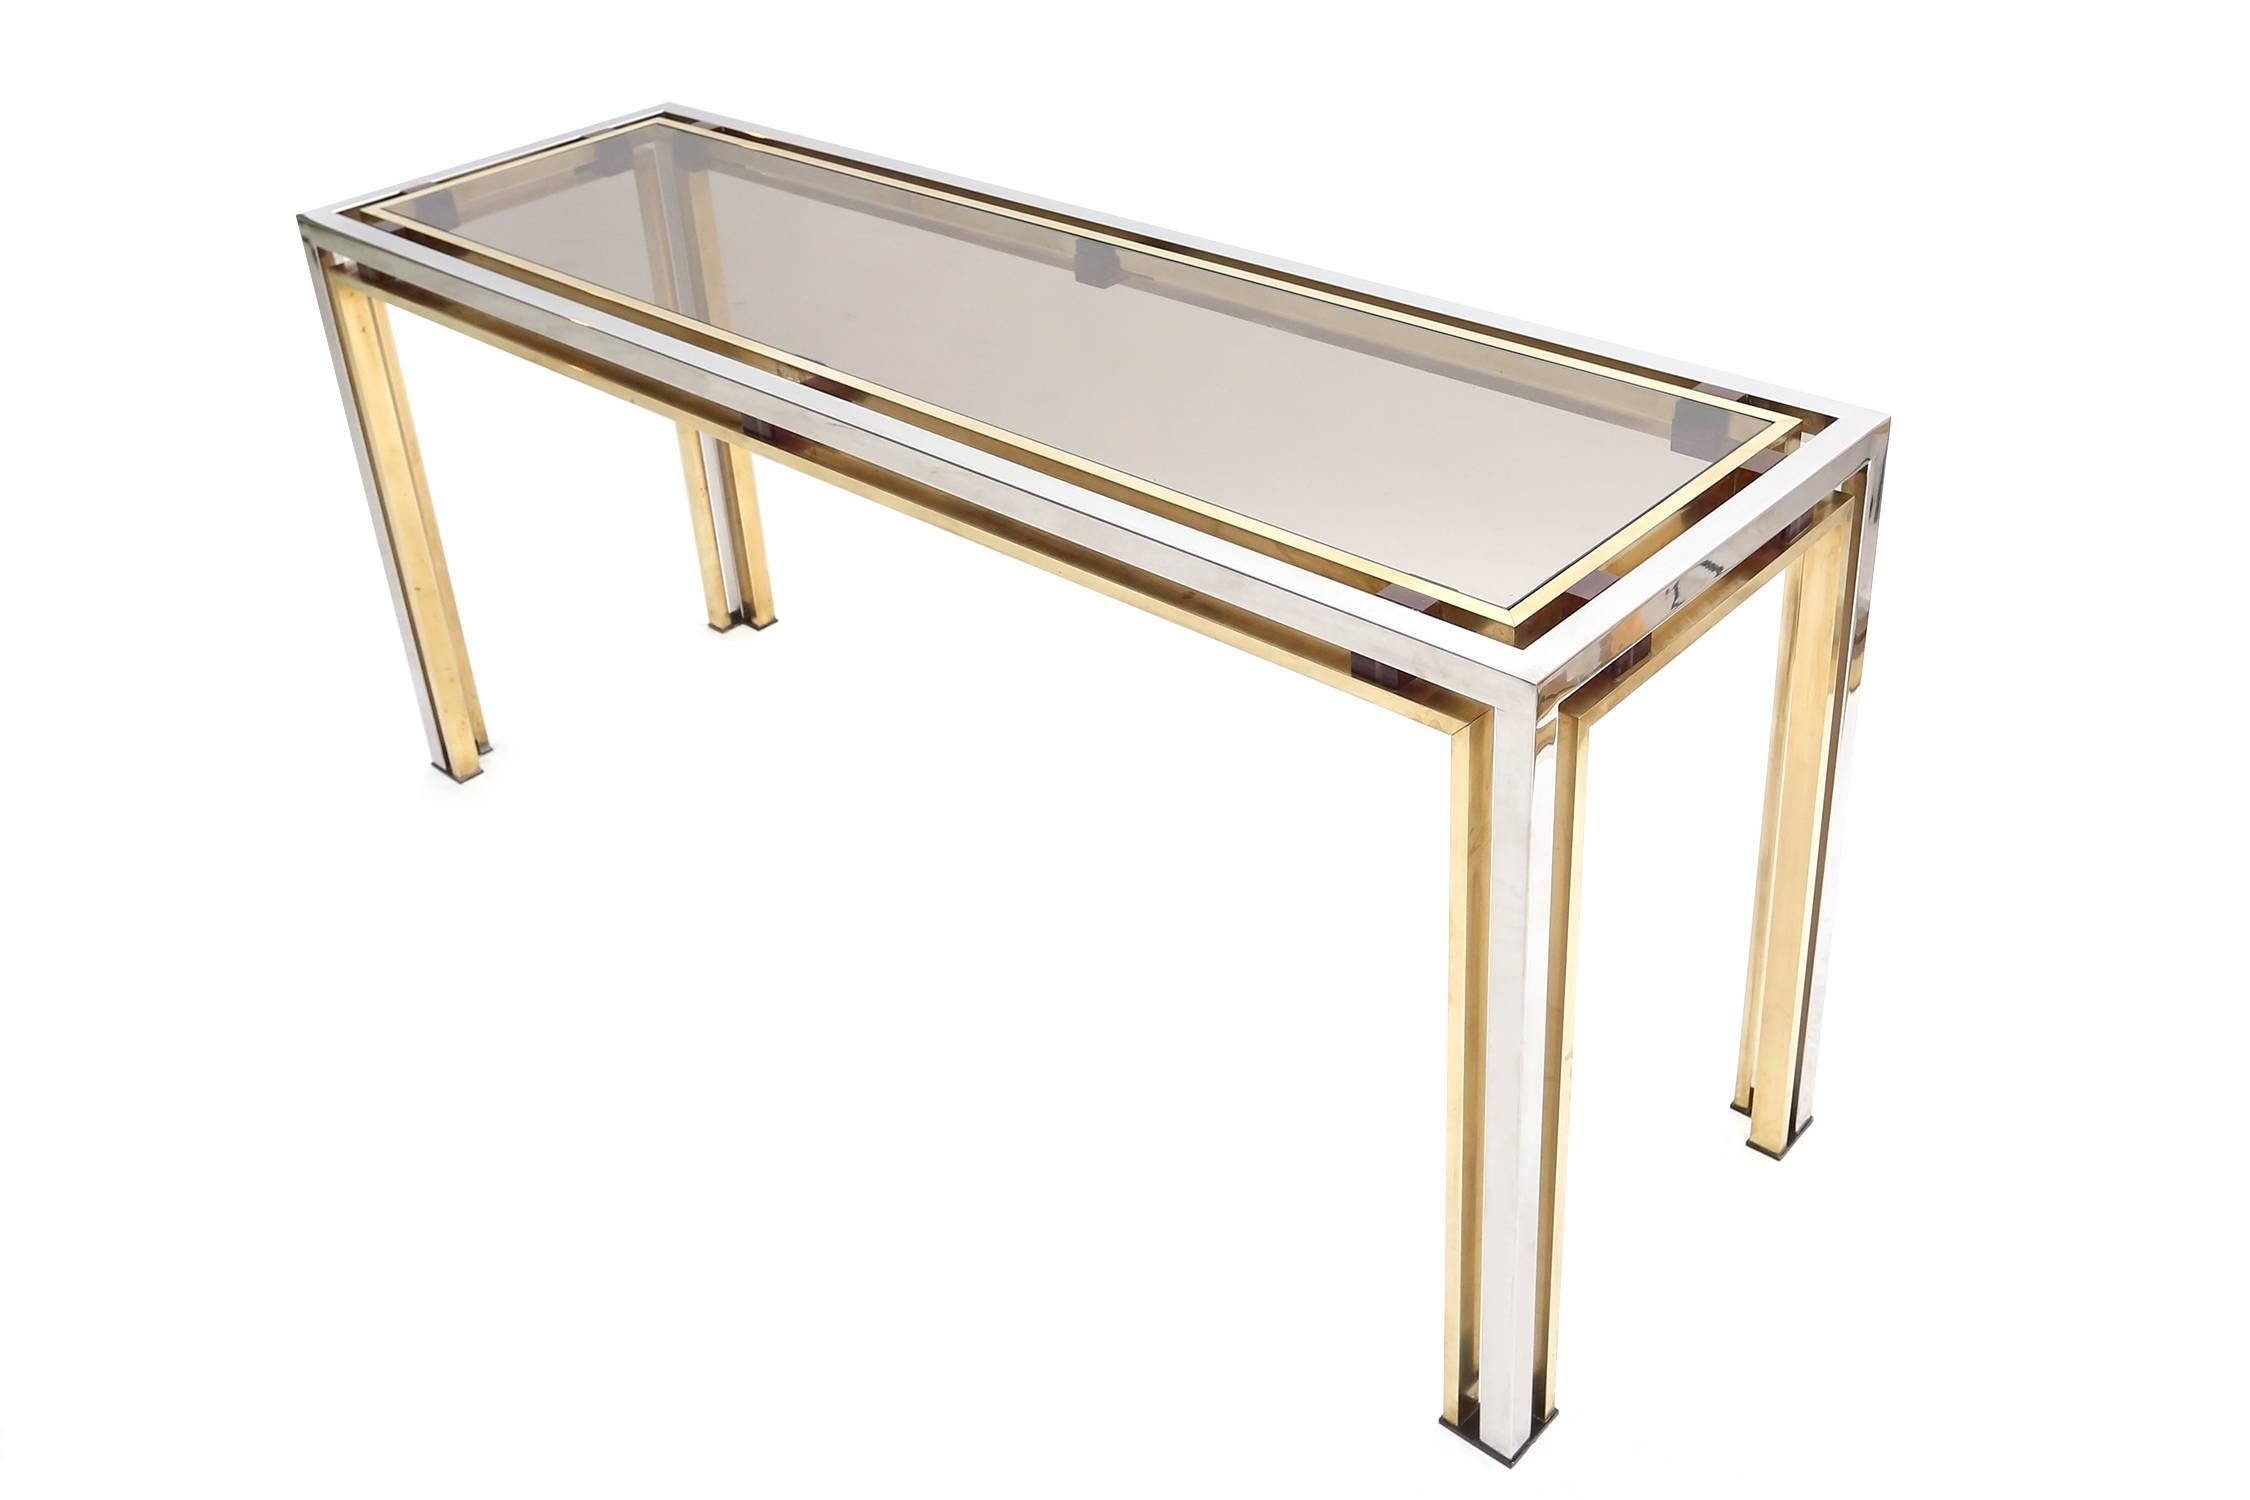 A superb console table by Romeo Rega, signed at the base.
Double-framed floating glass top is encased in a brass and chrome double frame.
Two toned structure, purple Lucite accents, continuous on the legs.
Italy, circa 1977.
Measures: W 160 cm H